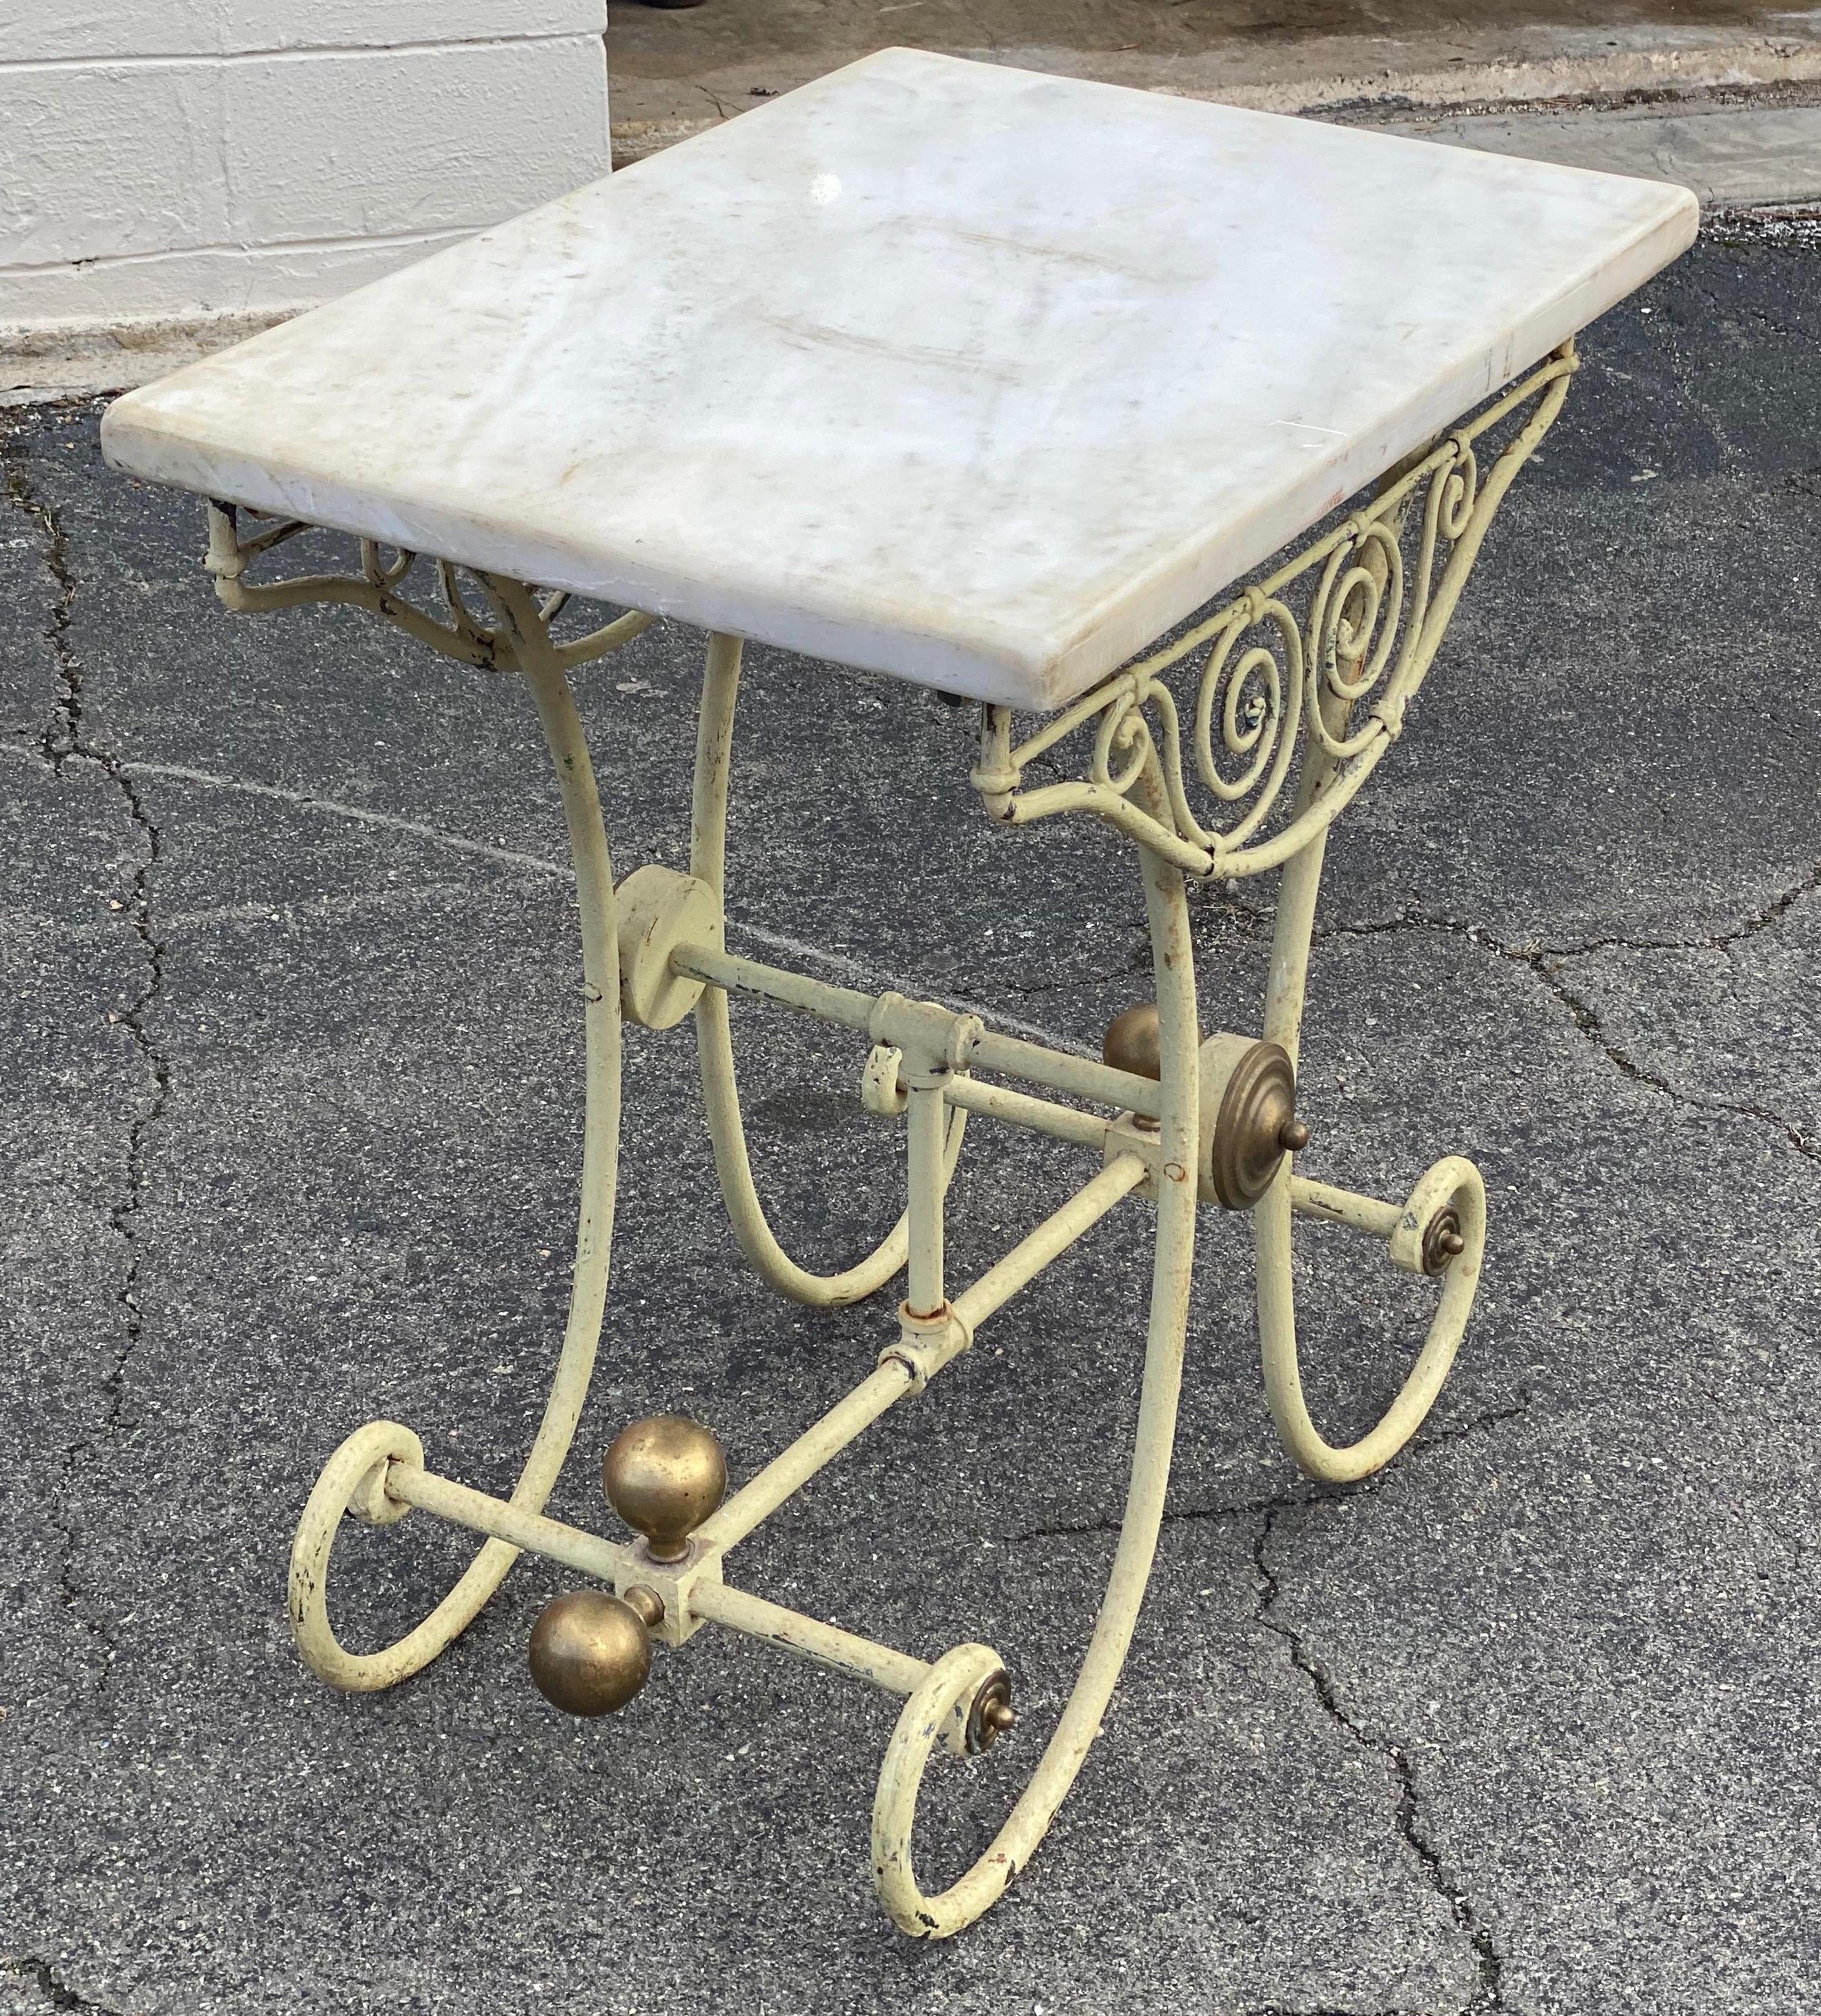 Smaller scale 19th century French marble top, iron and brass pastry table with scrolled apron, brass bosses.
 